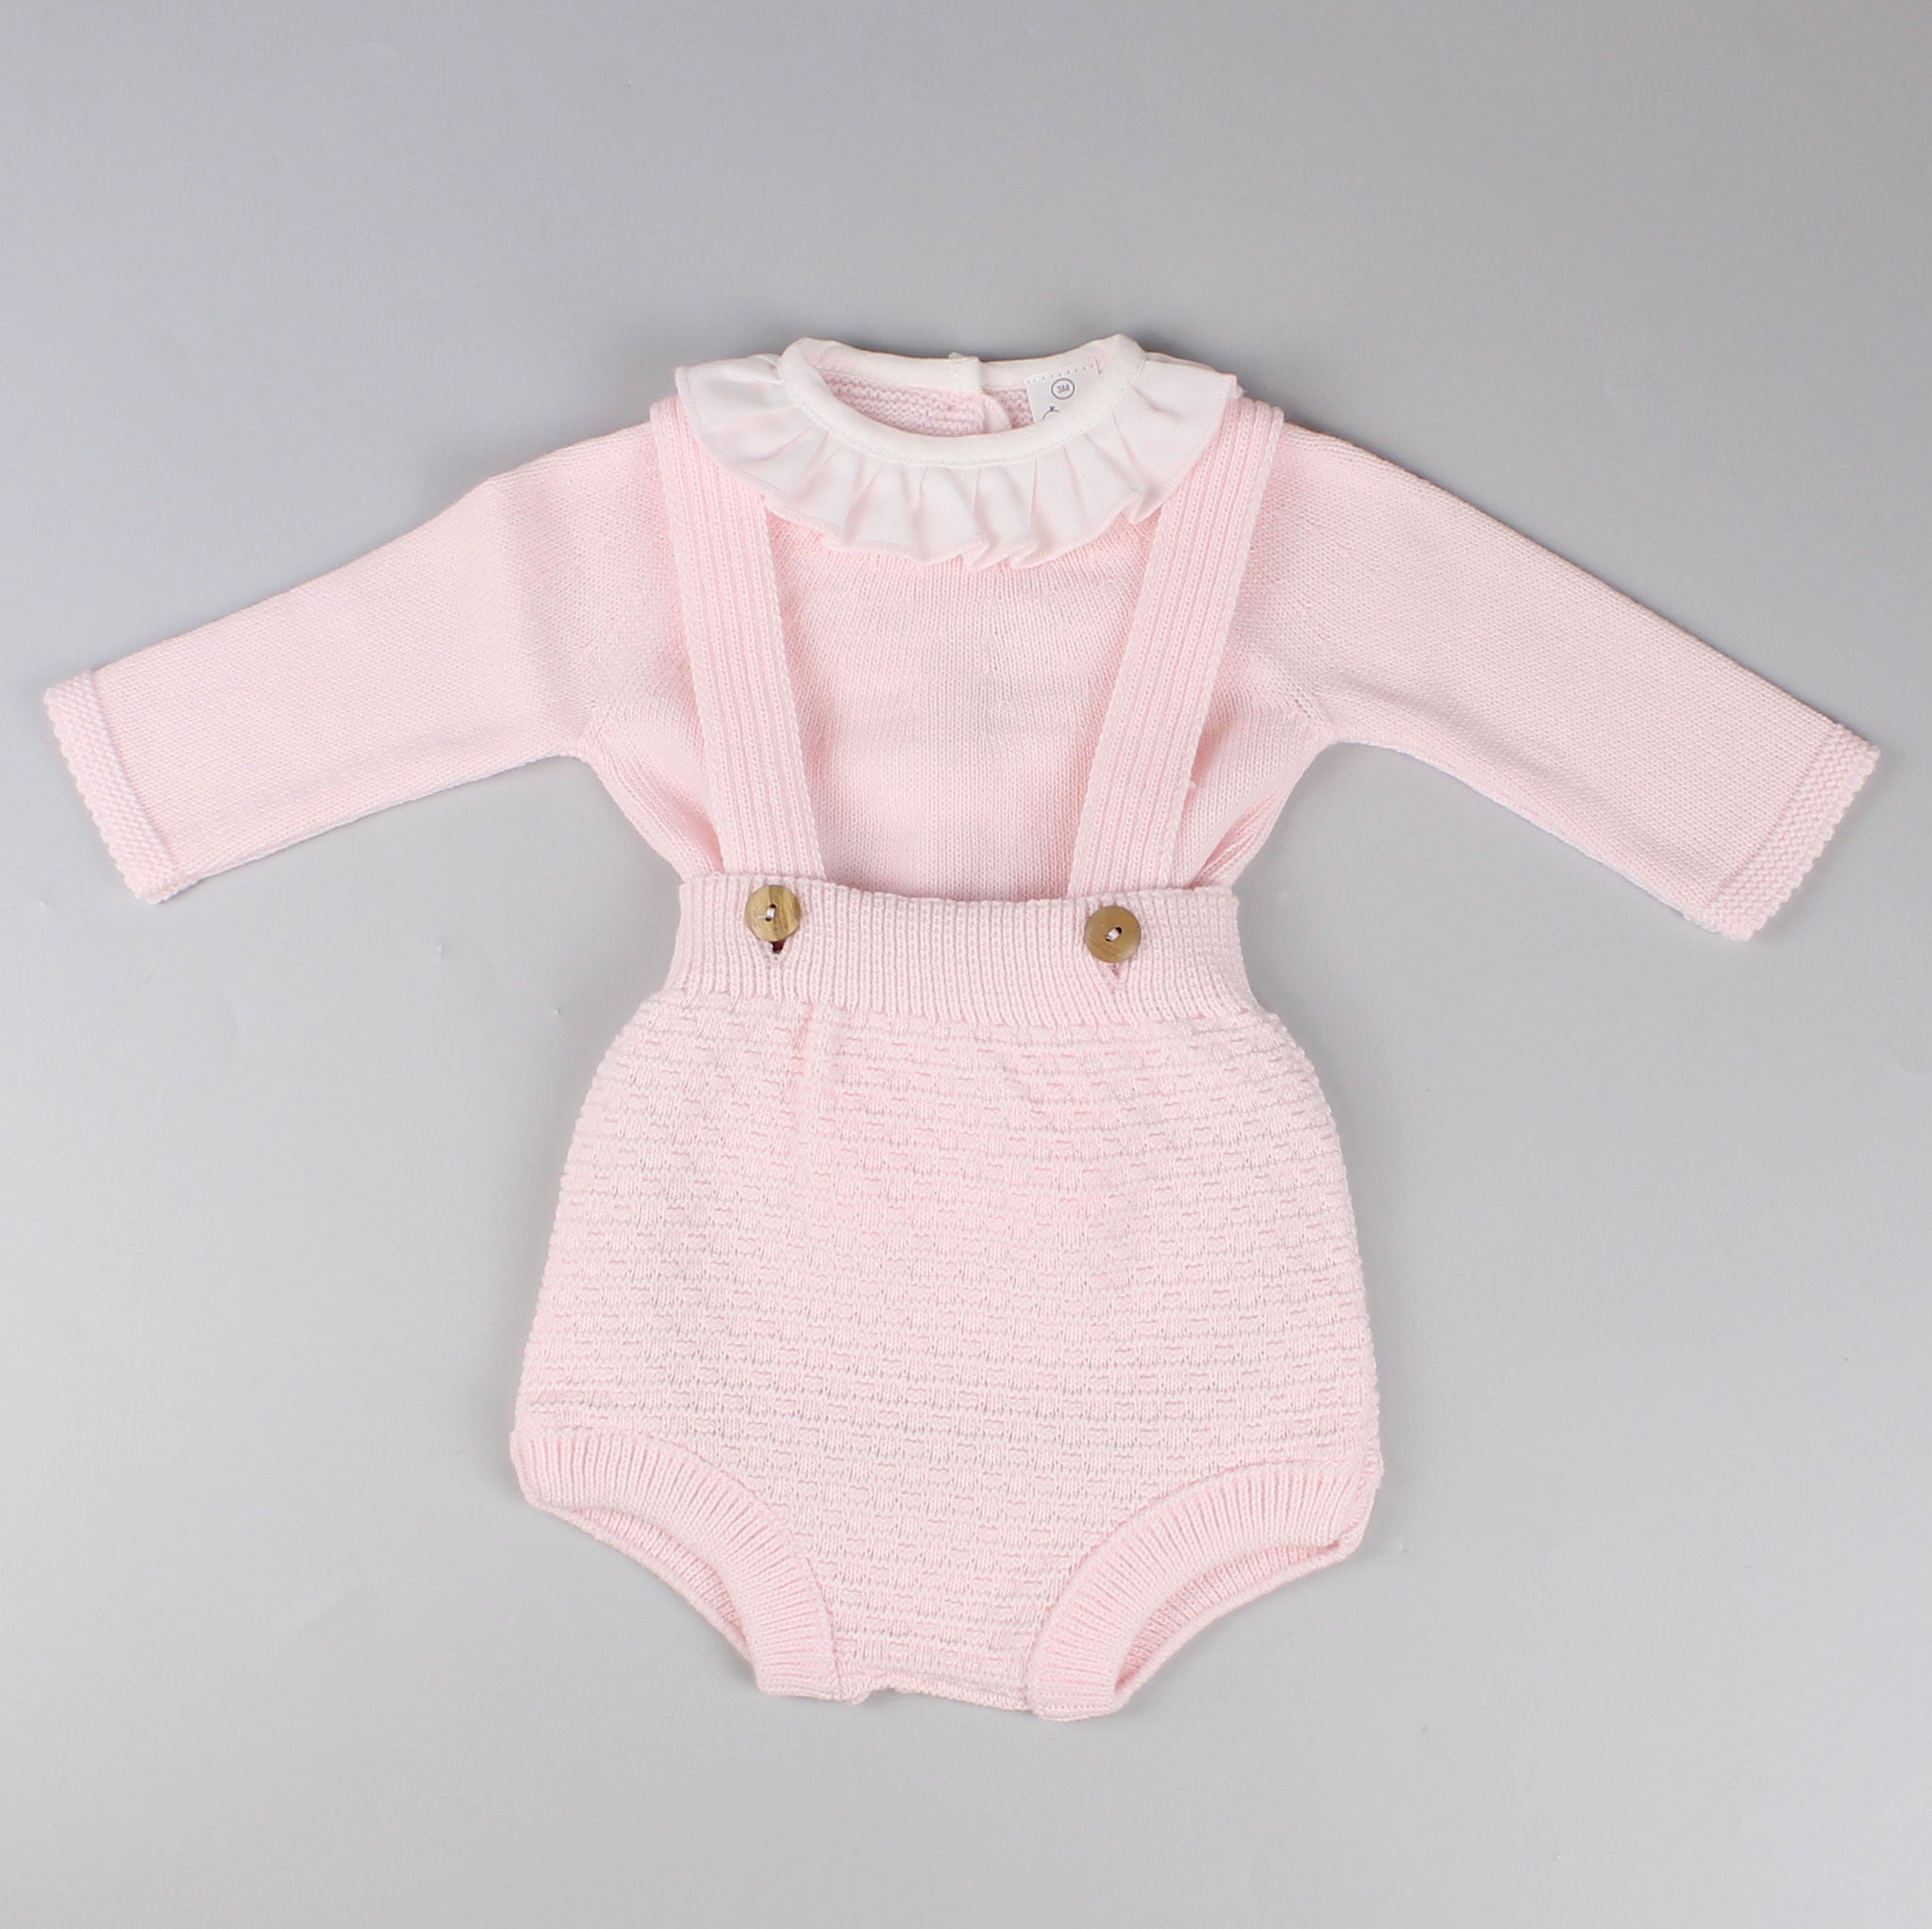 Baby Girls 2 Piece Knitted Outfit- Jam Pants and Top- Pink